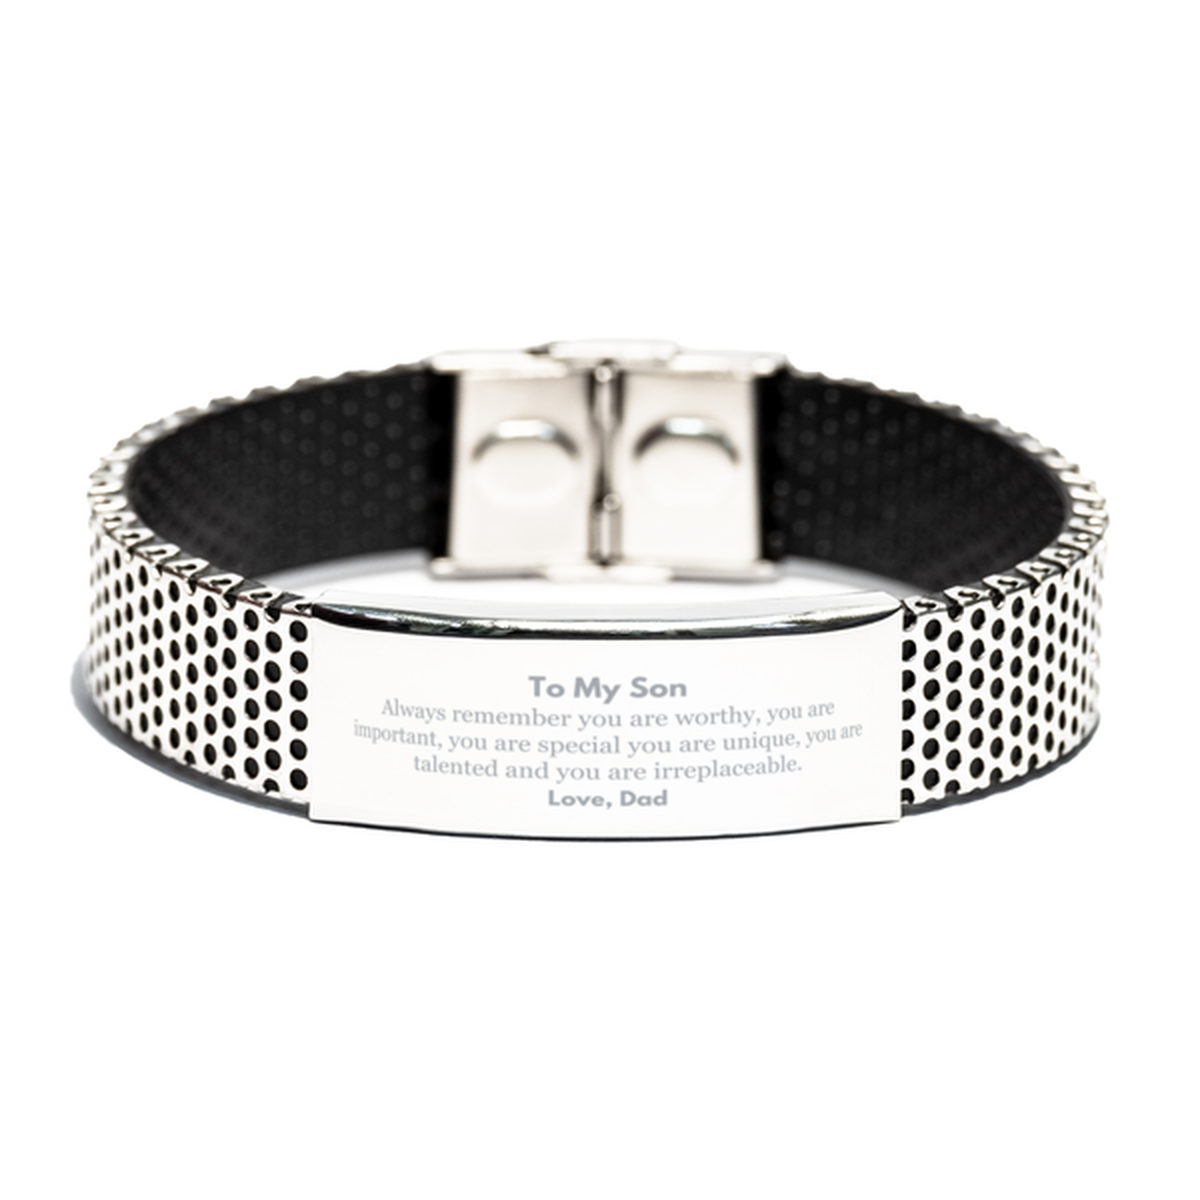 Son Birthday Gifts from Dad, Inspirational Stainless Steel Bracelet for Son Christmas Graduation Gifts for Son Always remember you are worthy, you are important. Love, Dad